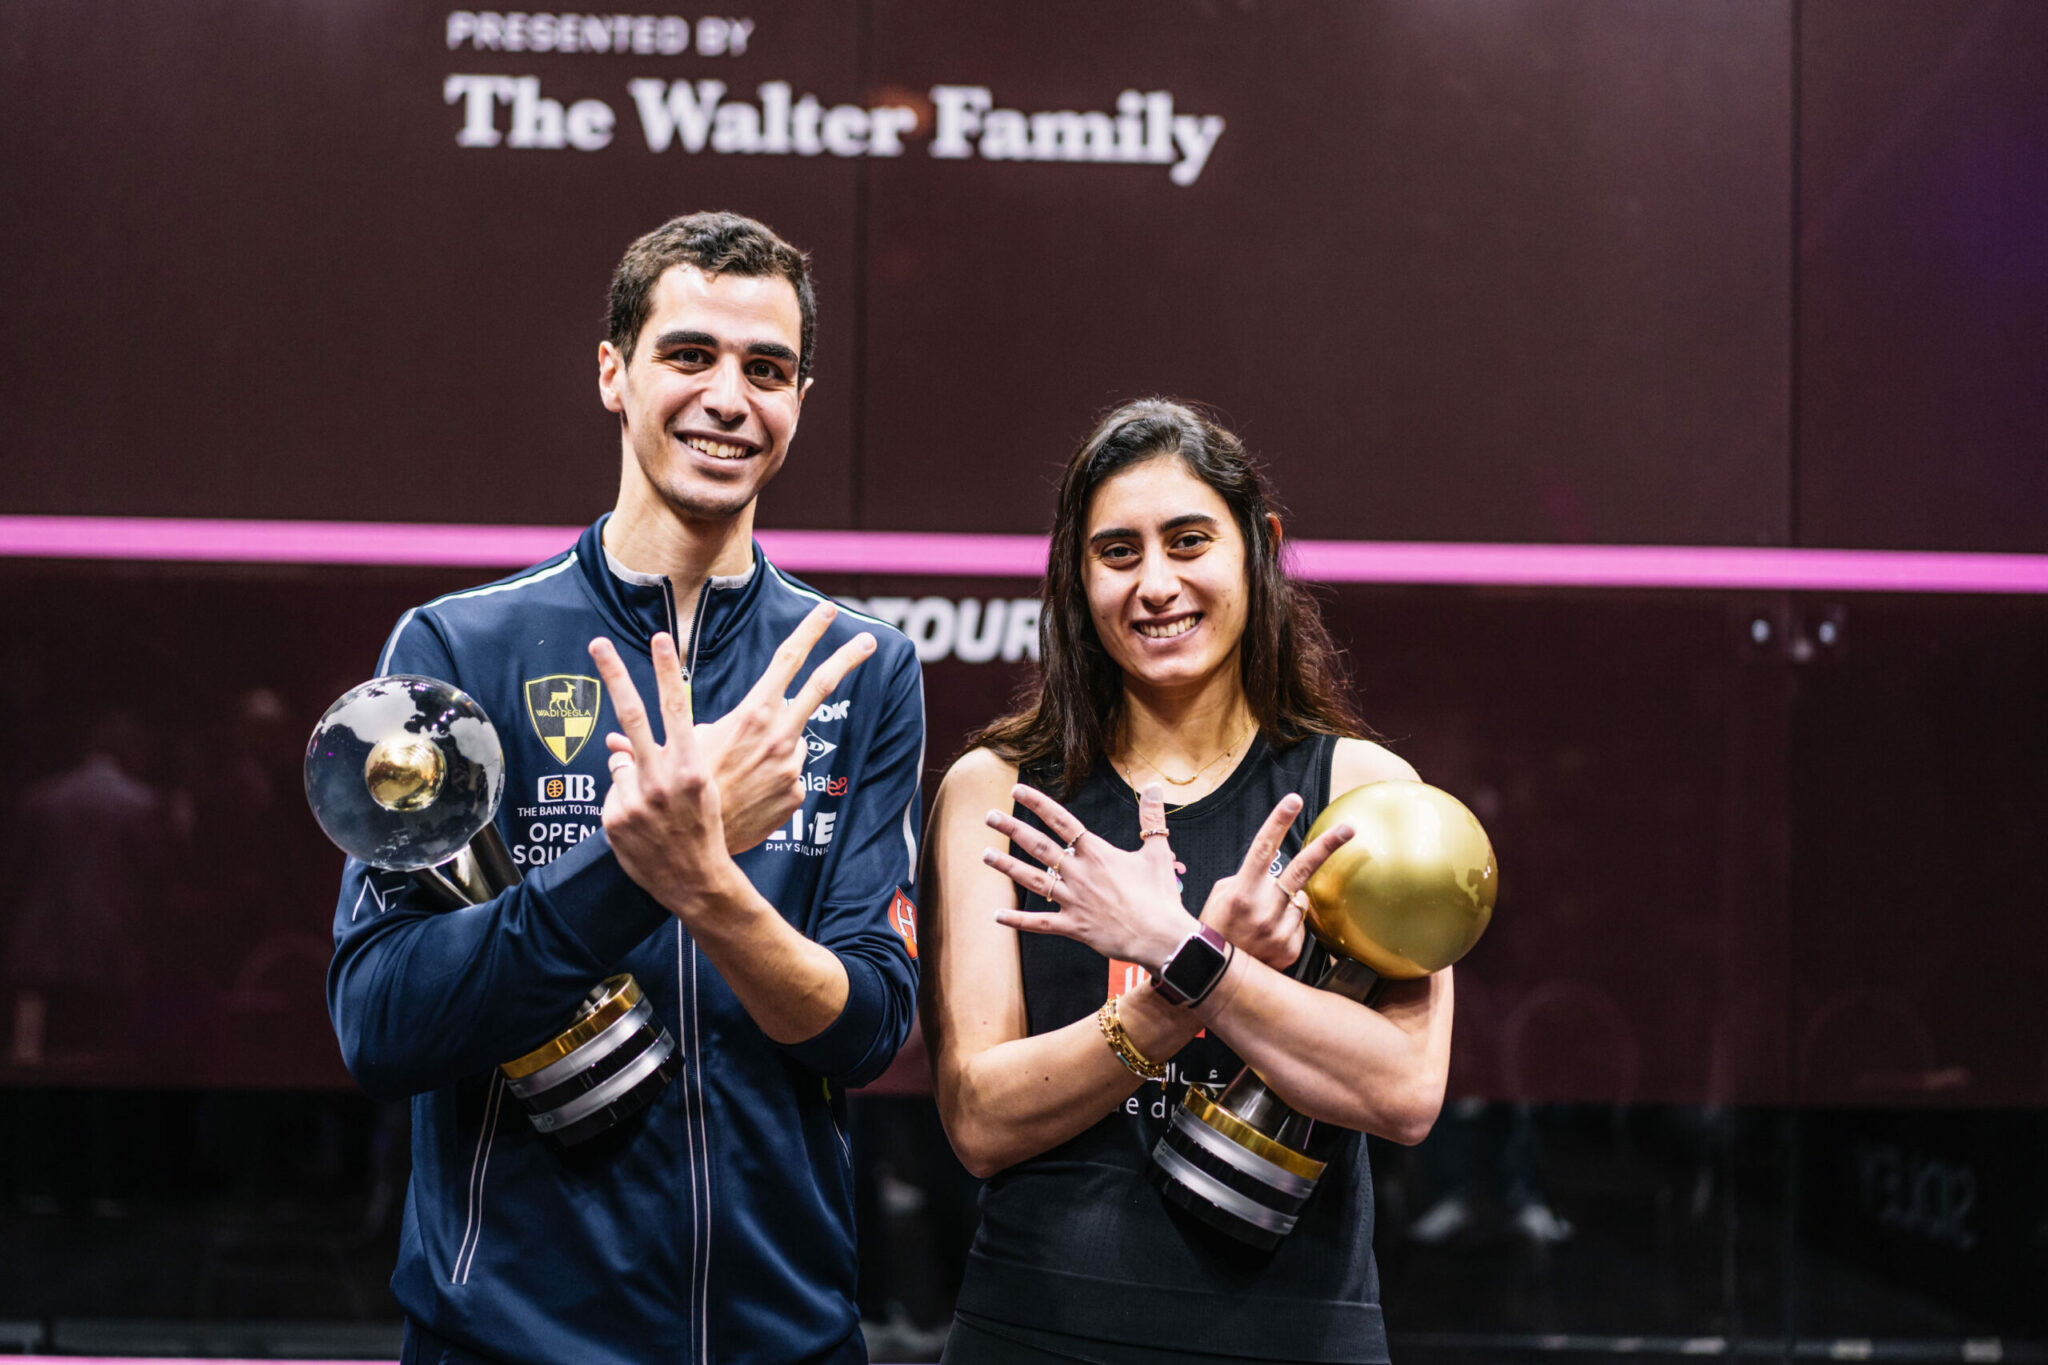 Egyptians El Sherbini and Farag both retain World Squash Championships titles in Chicago